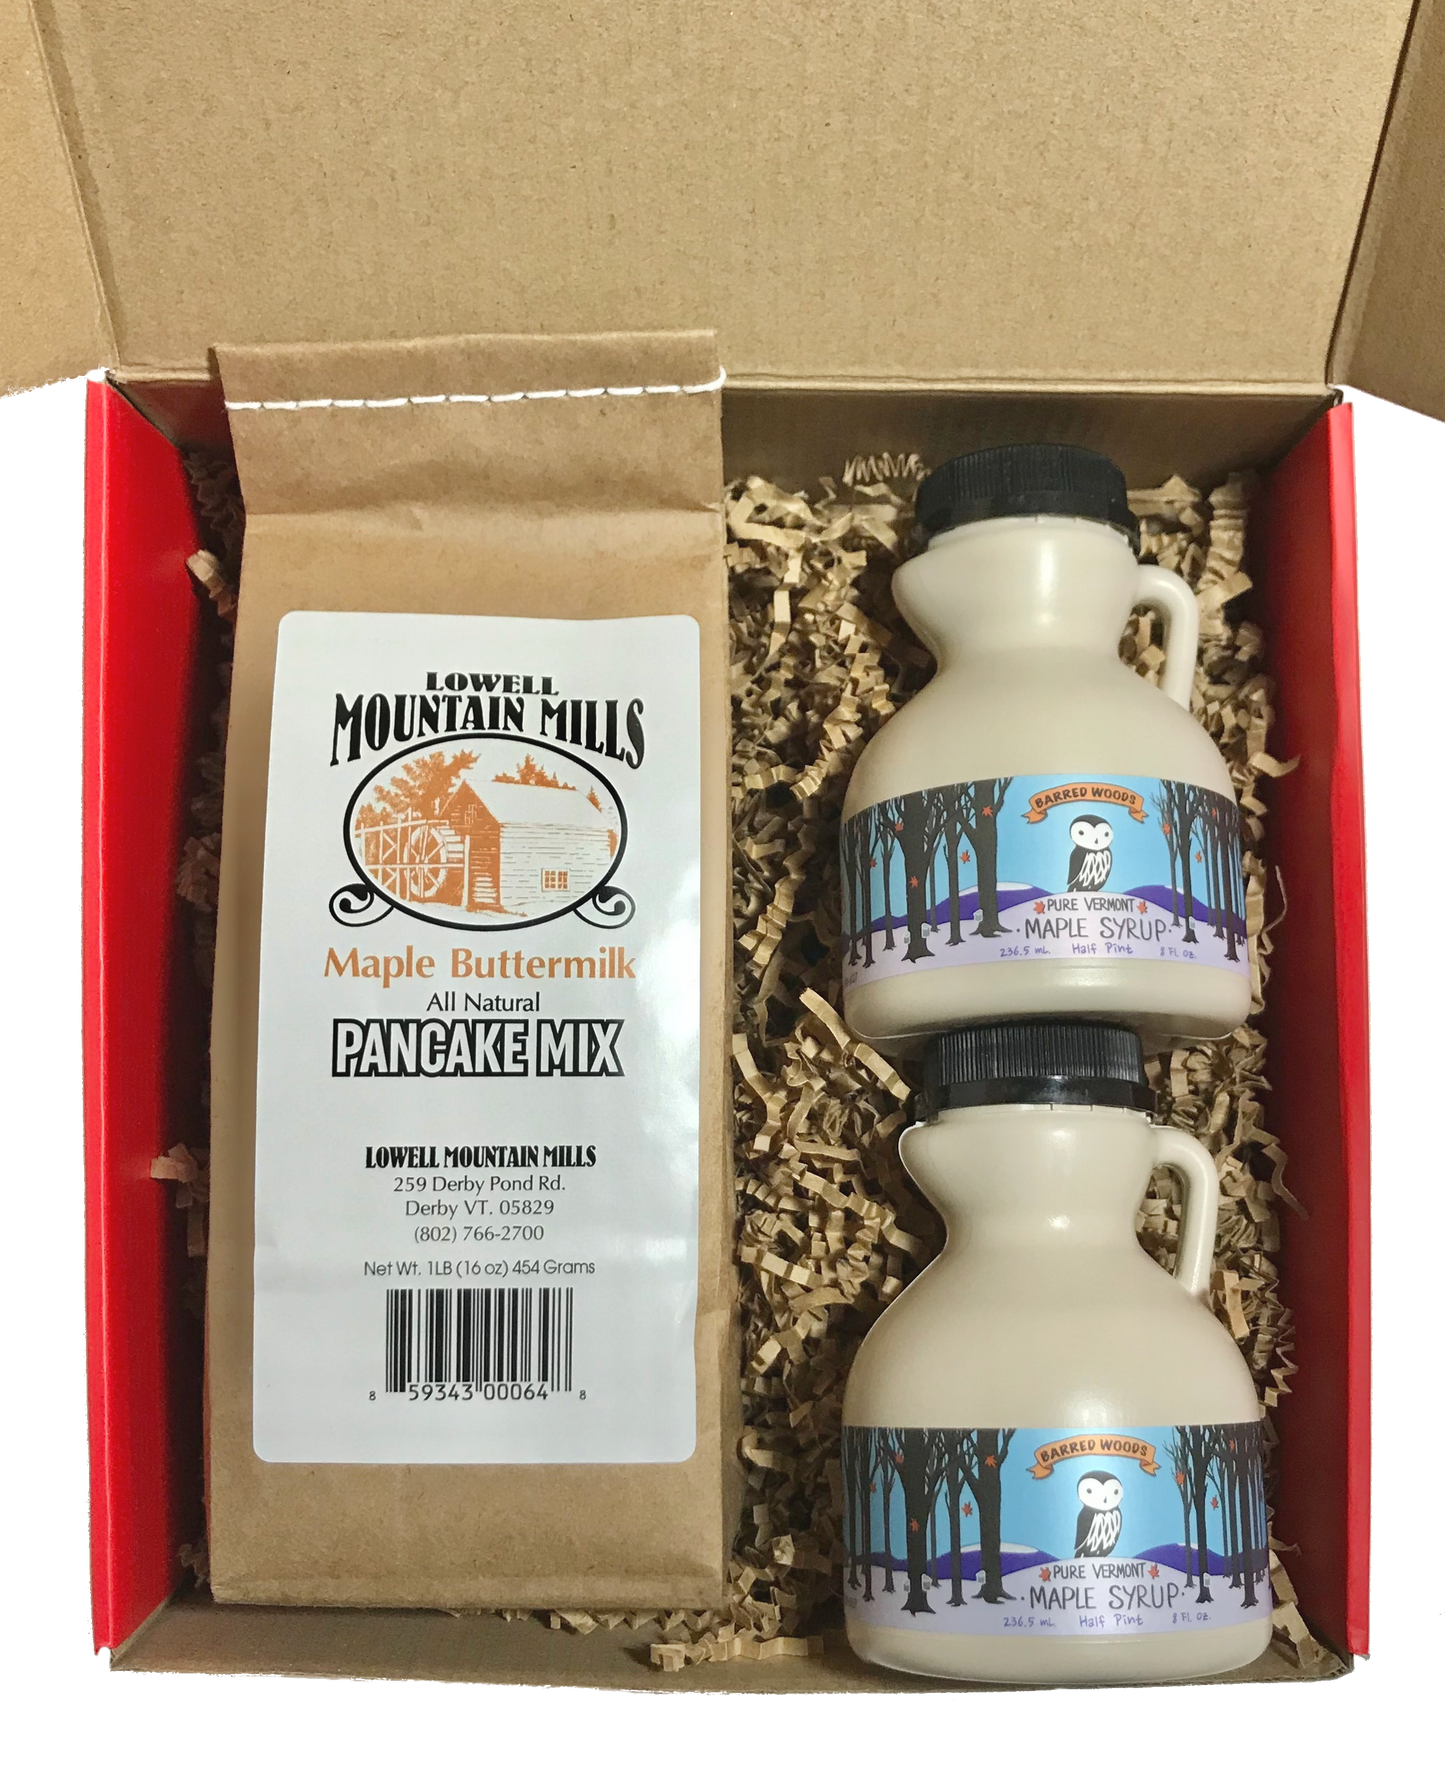 Maple Gift Box with two 8 oz Jugs of Syrup (one Amber Grade and one Dark Grade) and Pancake Mix - Medium Red Gift Box - Barred Woods Maple